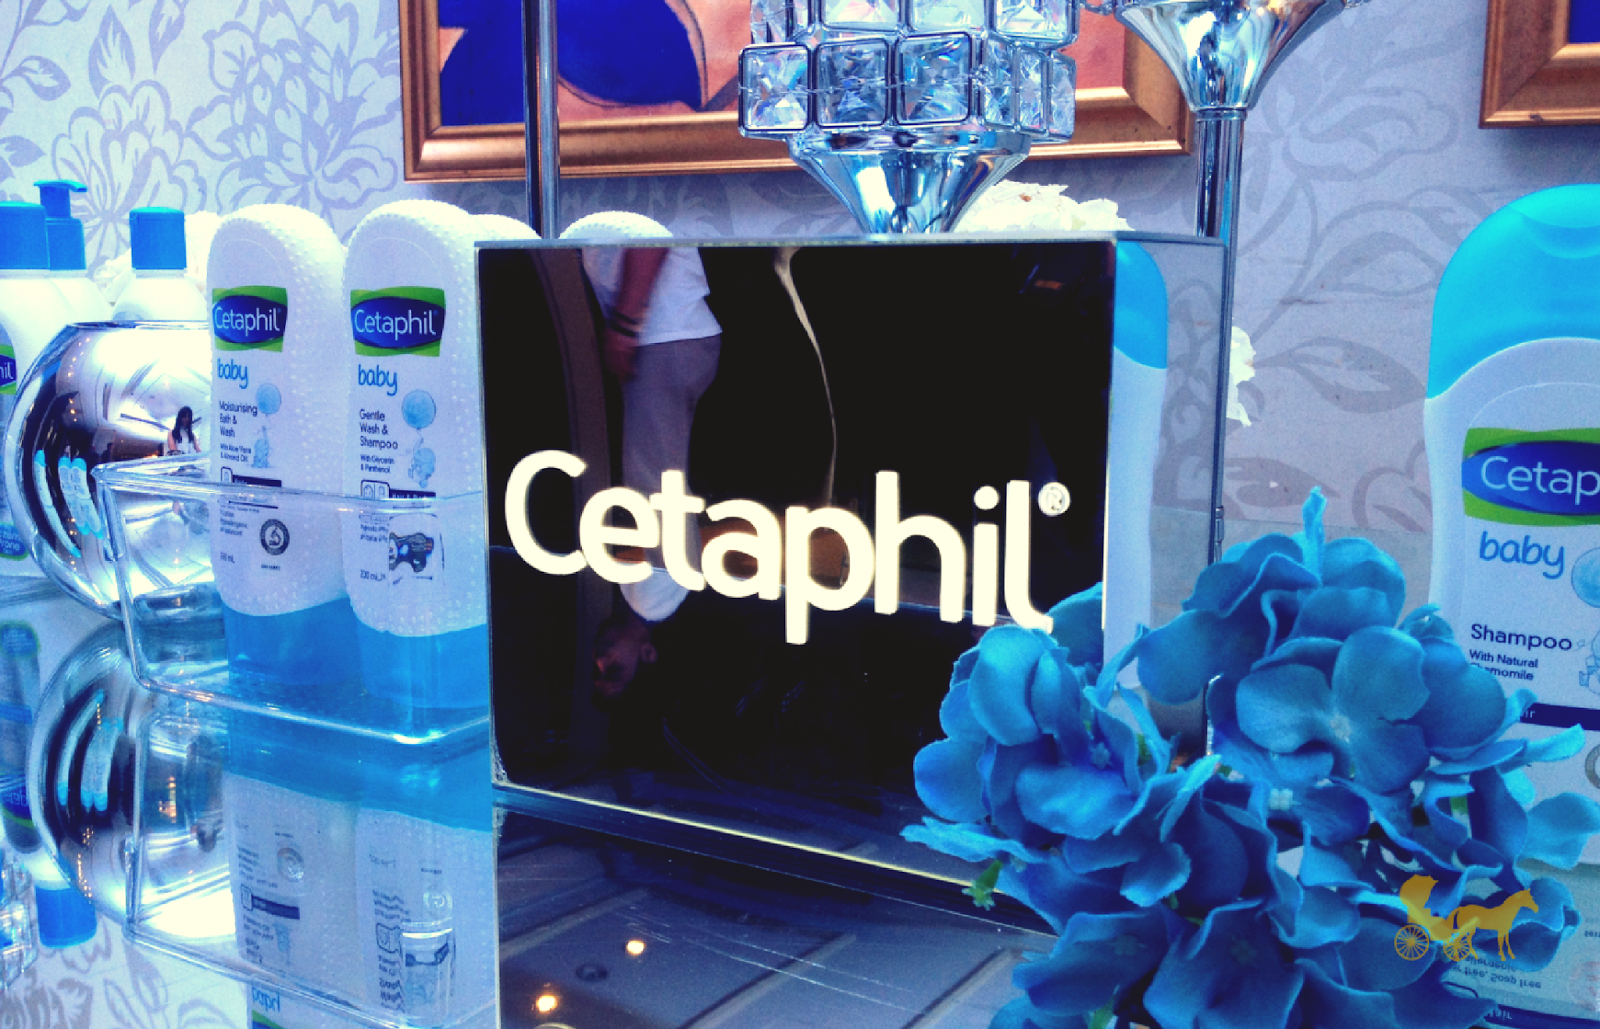 cetaphil-70-anniversary-new-products-face-baby-4